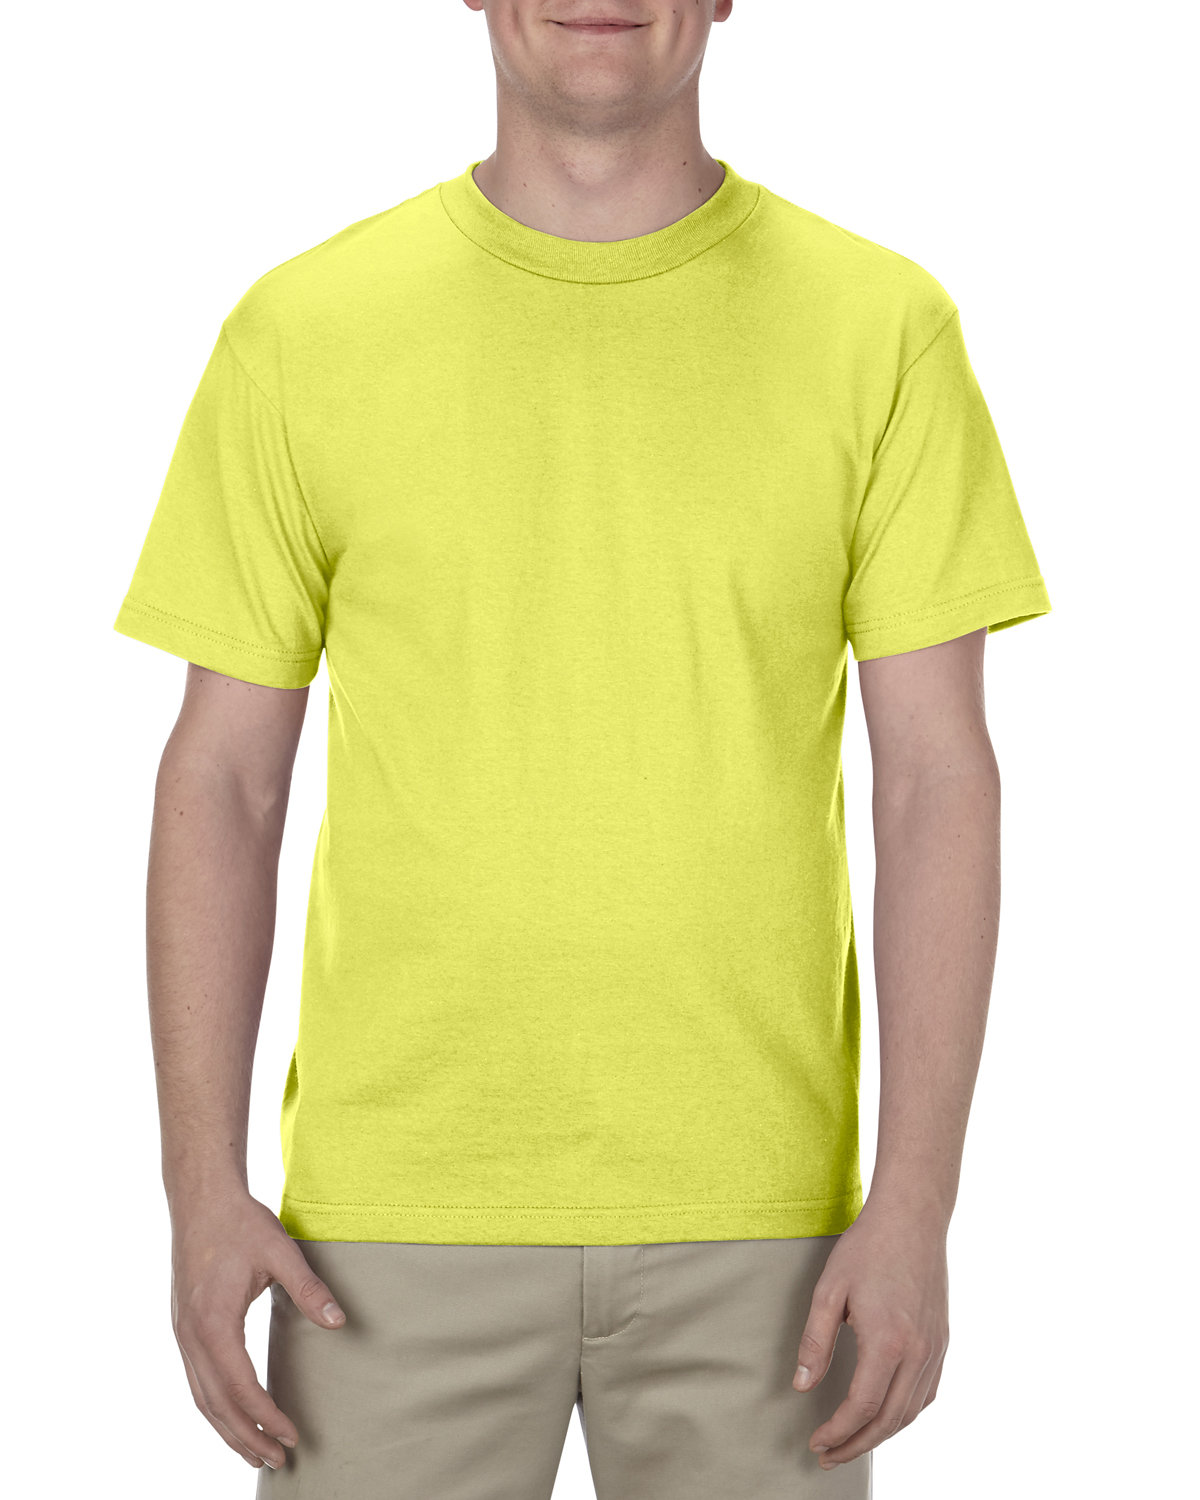 American Apparel Adult 6.0 oz., 100% Cotton T-Shirt SAFETY GREEN 